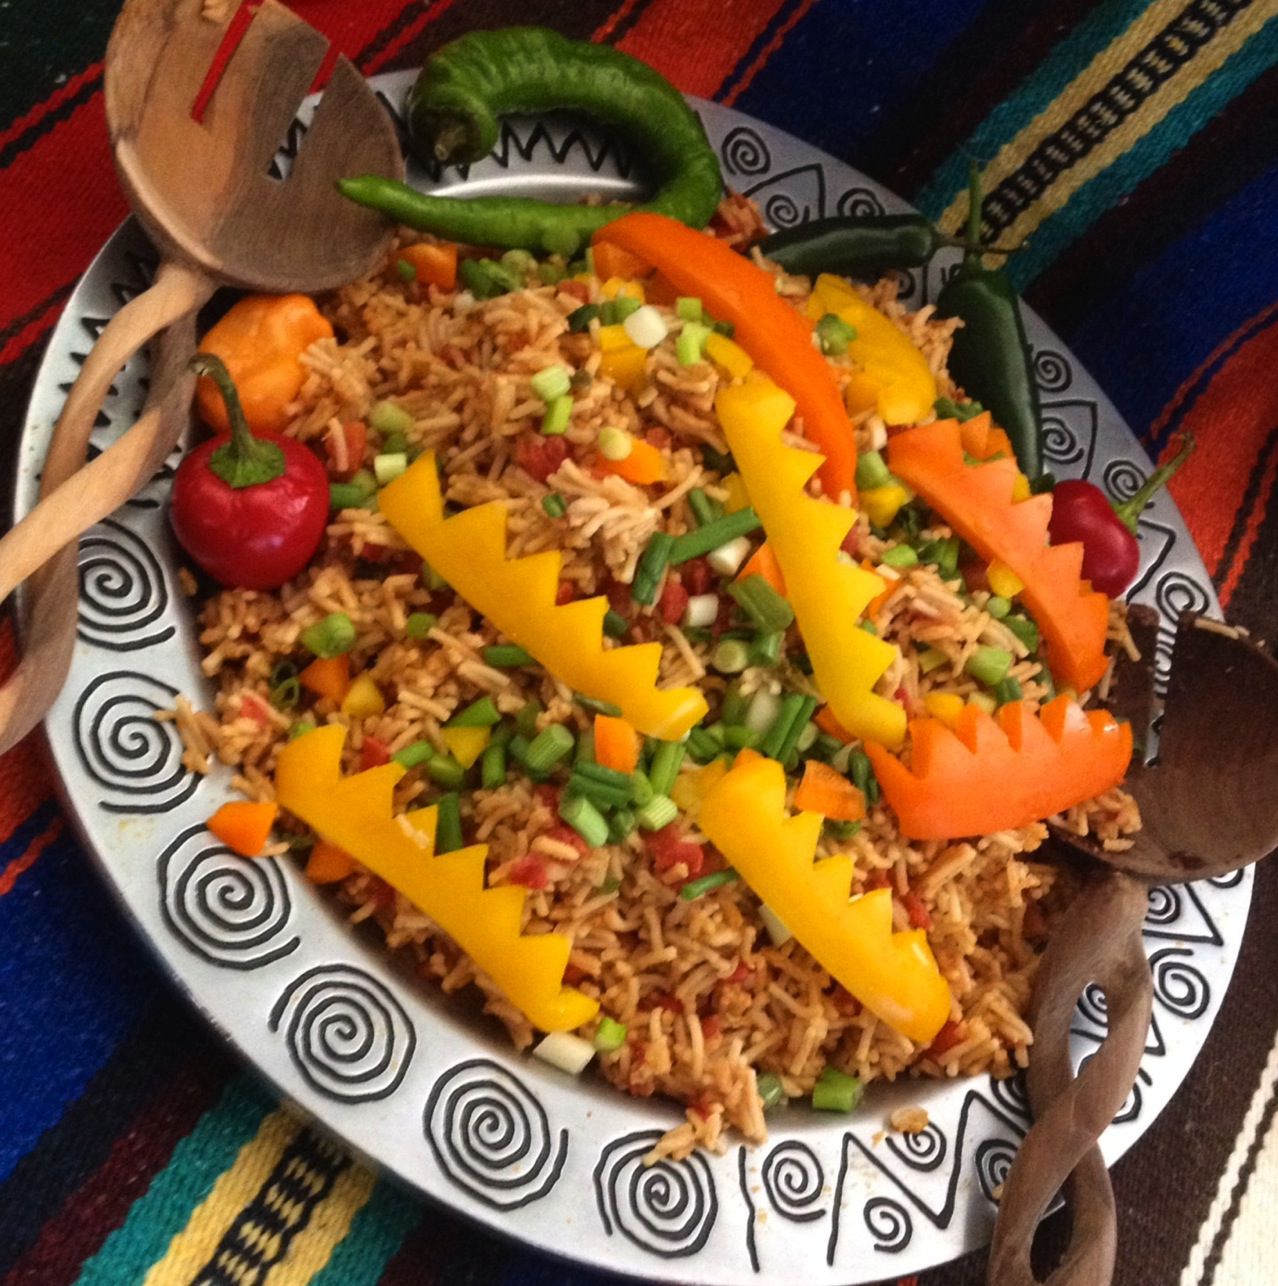 No reptiles were harmed in the making of this iguana rice. 